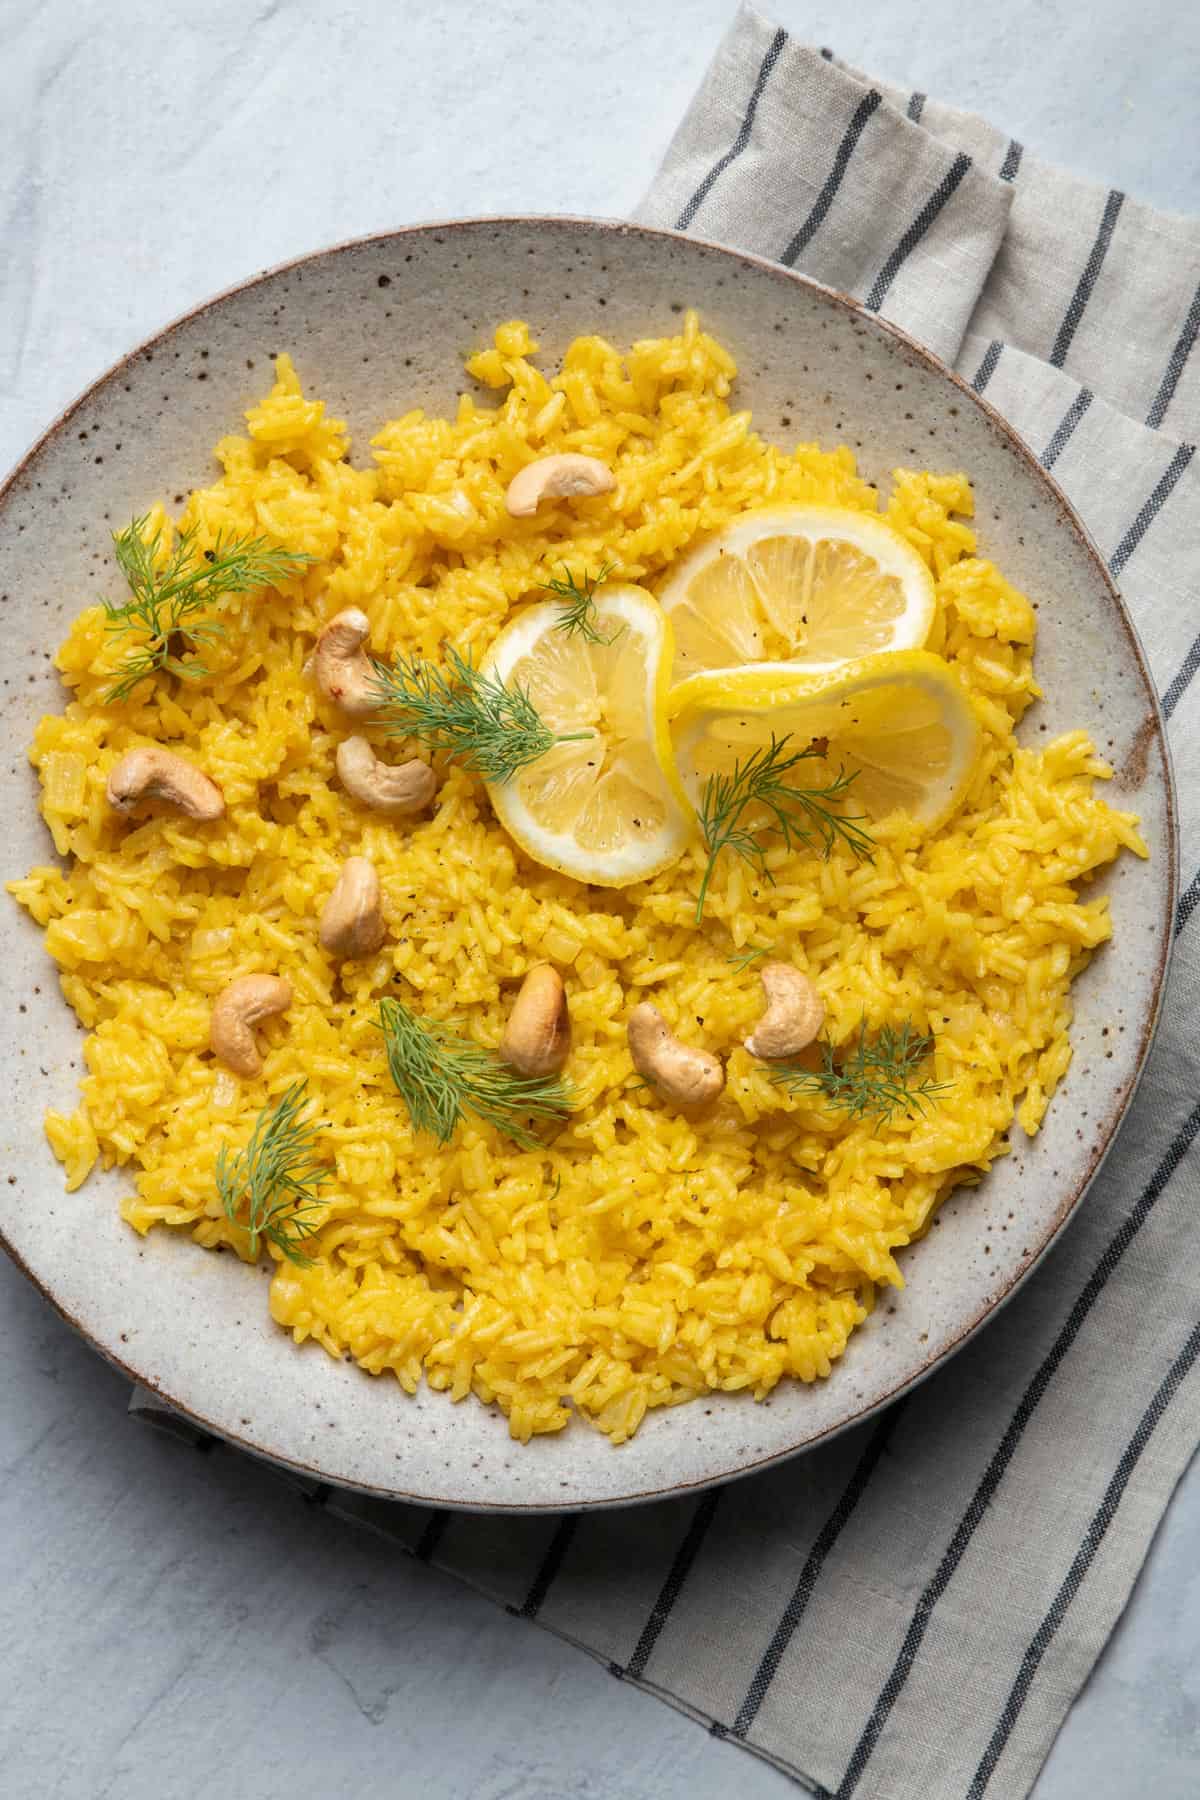 Large bowl of lemon rice garnished with dill and cashews